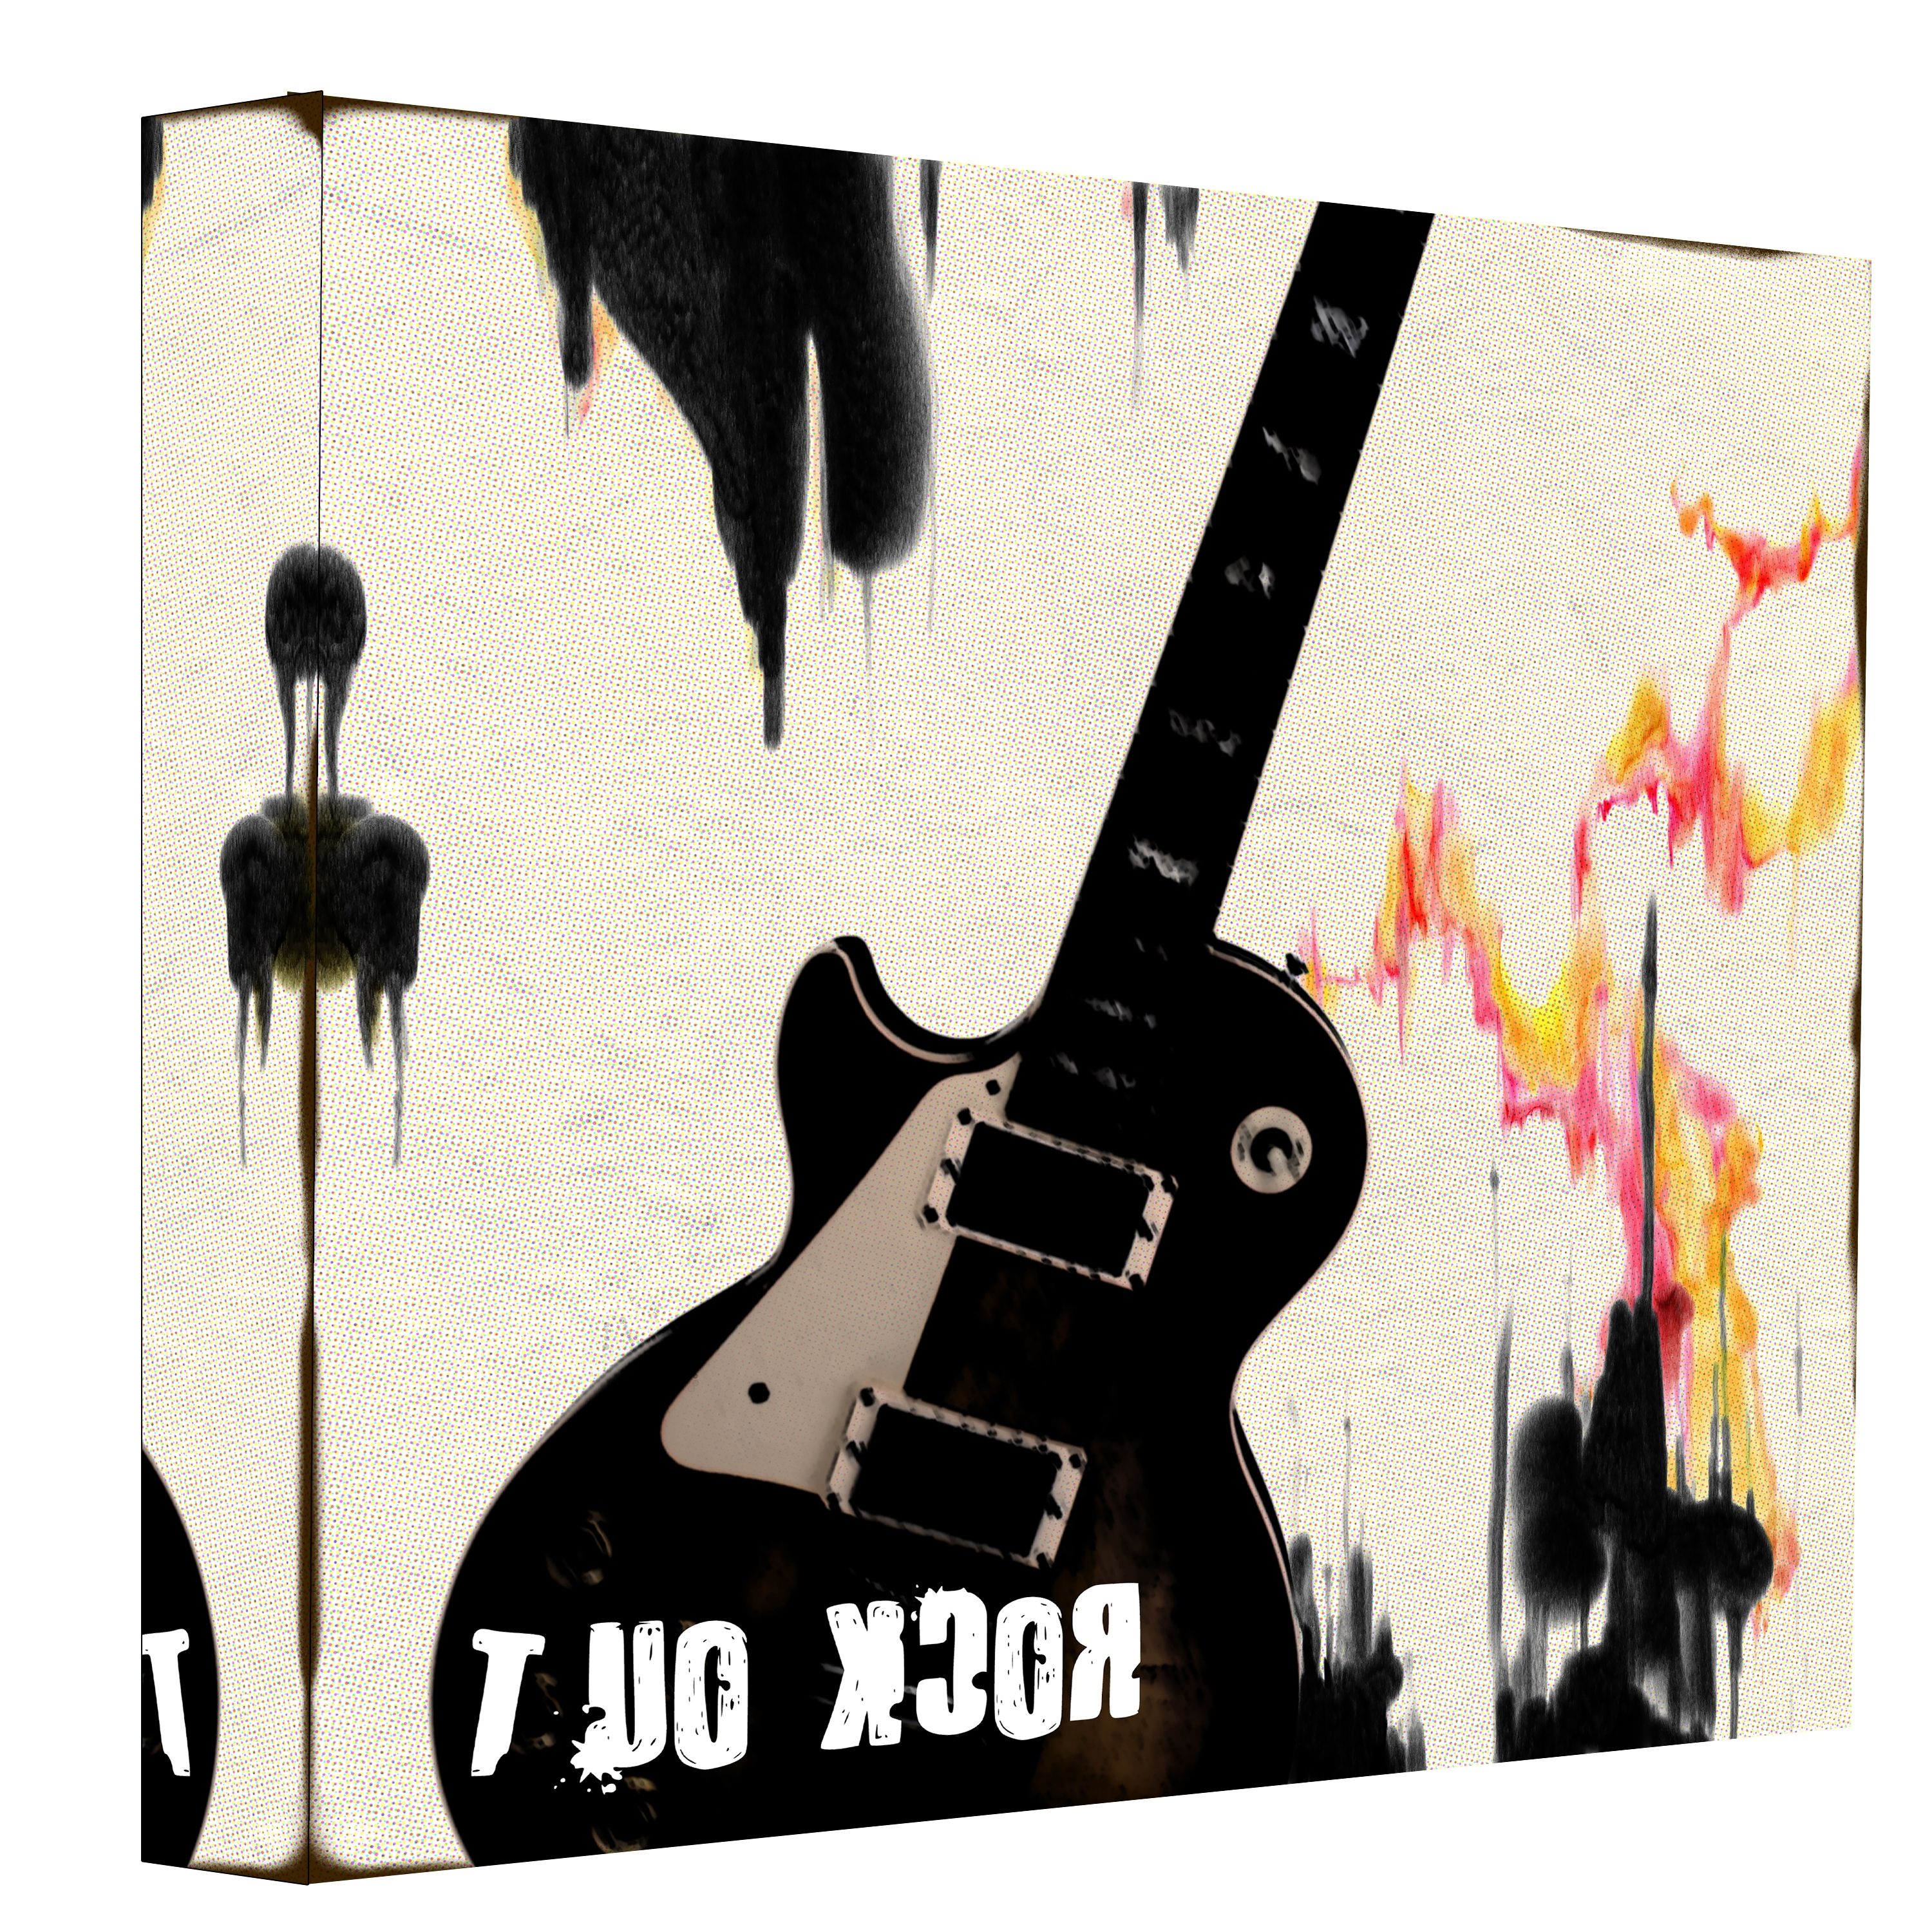 Guitar Canvas Wall Art With Widely Used Rock Out Guitar Canvas Wall Art – Ptmimages (View 2 of 15)